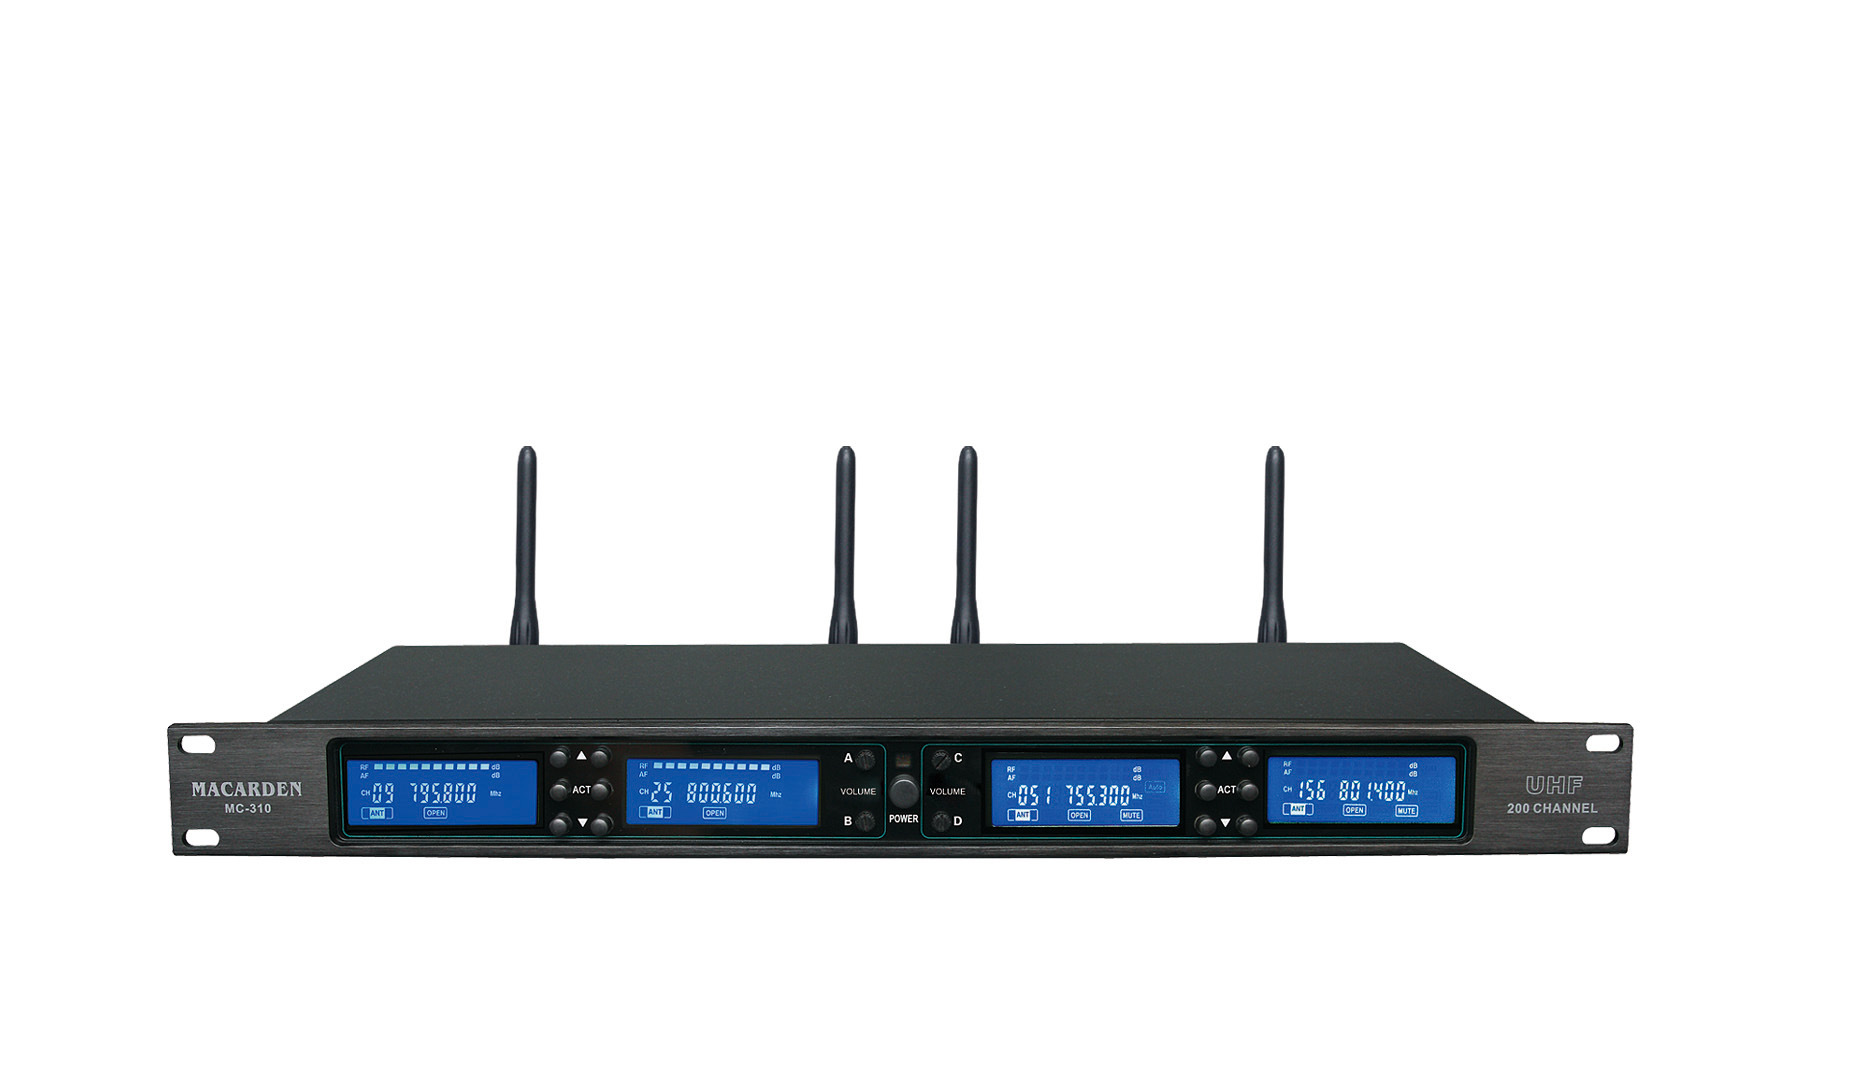 Multi Channels Wireless Conference Microphone (MC-310)